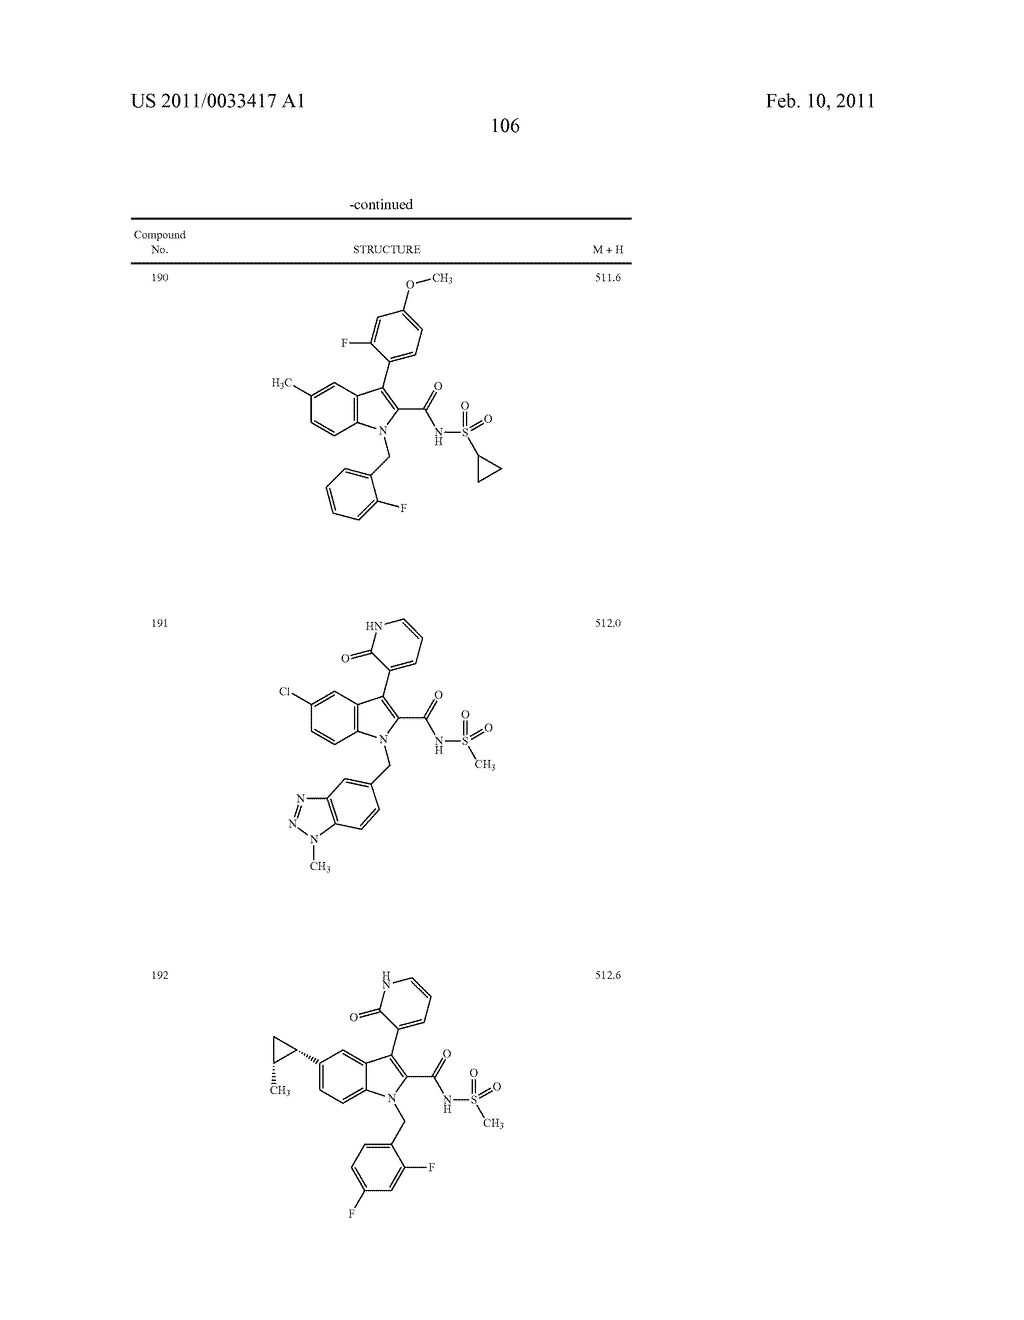 2,3-SUBSTITUTED INDOLE DERIVATIVES FOR TREATING VIRAL INFECTIONS - diagram, schematic, and image 107